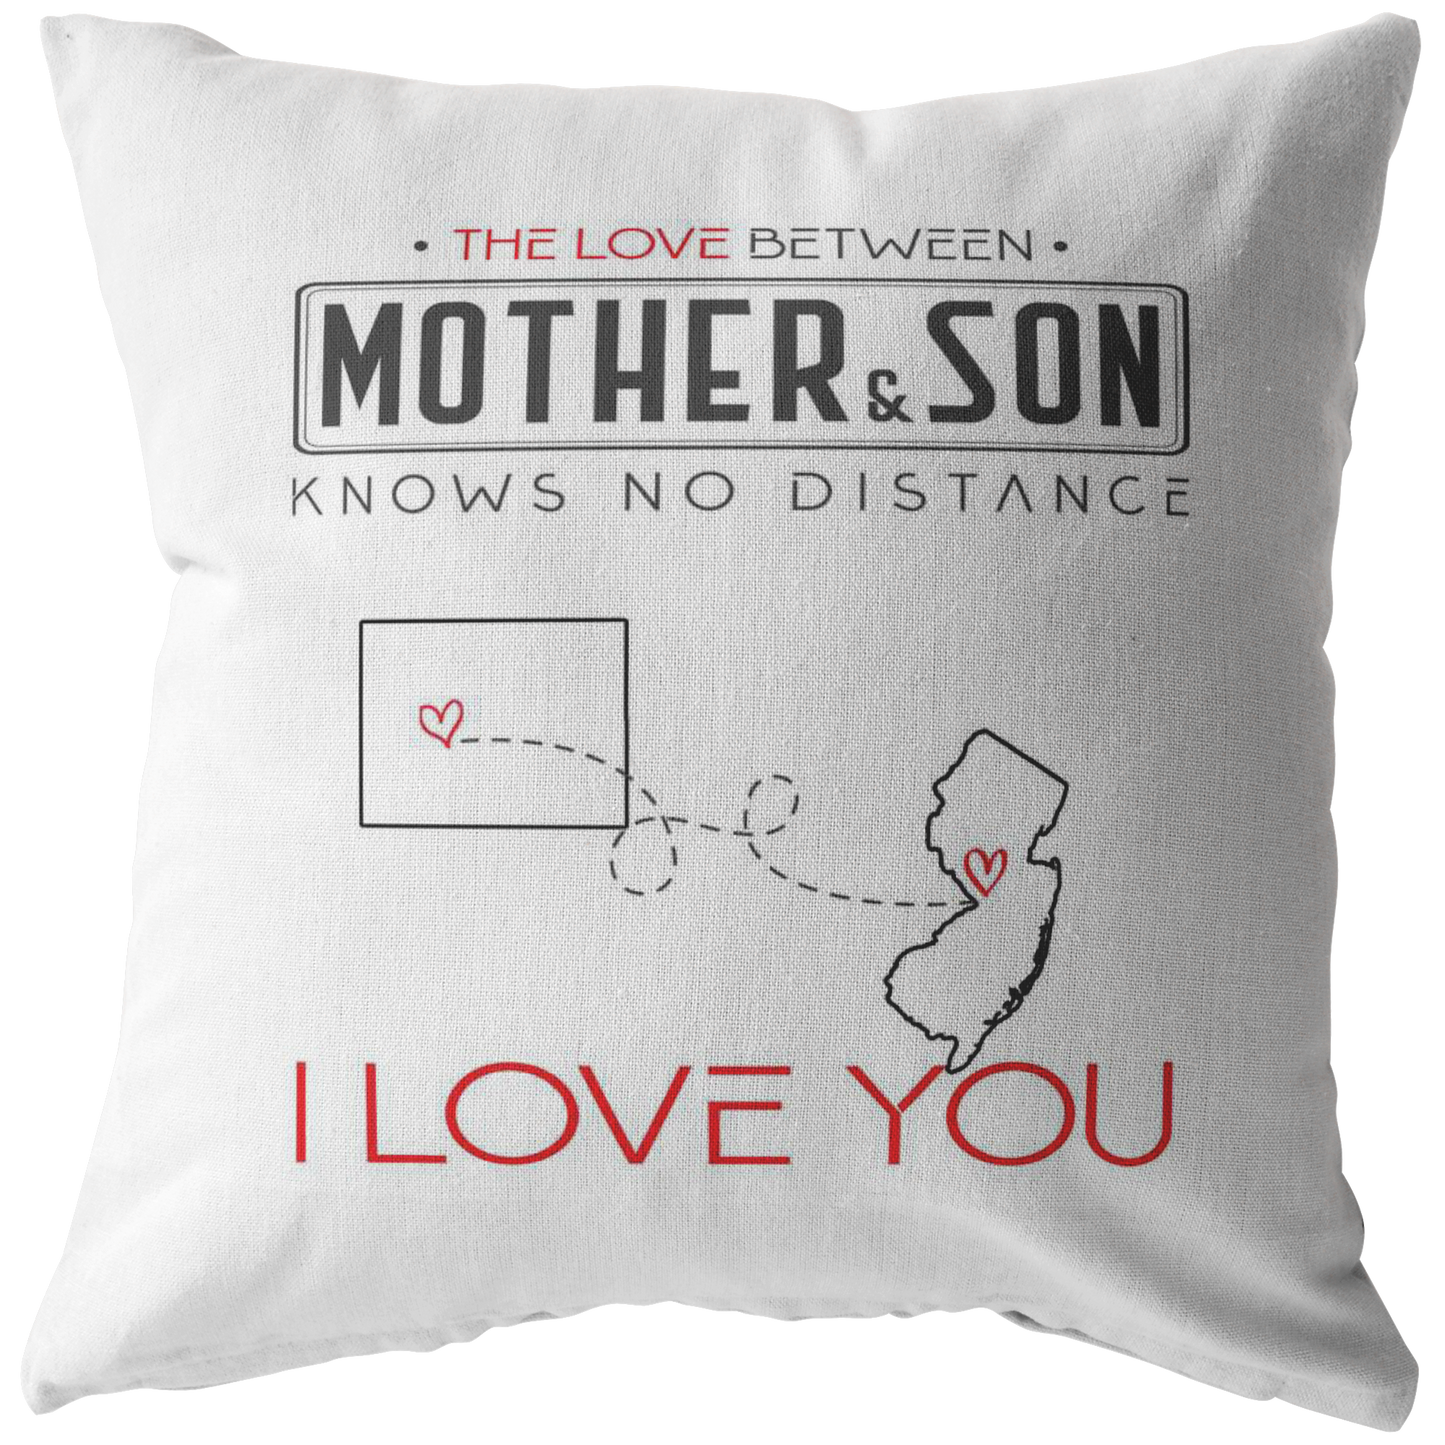 ND-pl20419999-sp-23805 - [ Colorado | New Jersey | 1 ]The Love Between Mother  Son Knows No Distance Colorado Sta